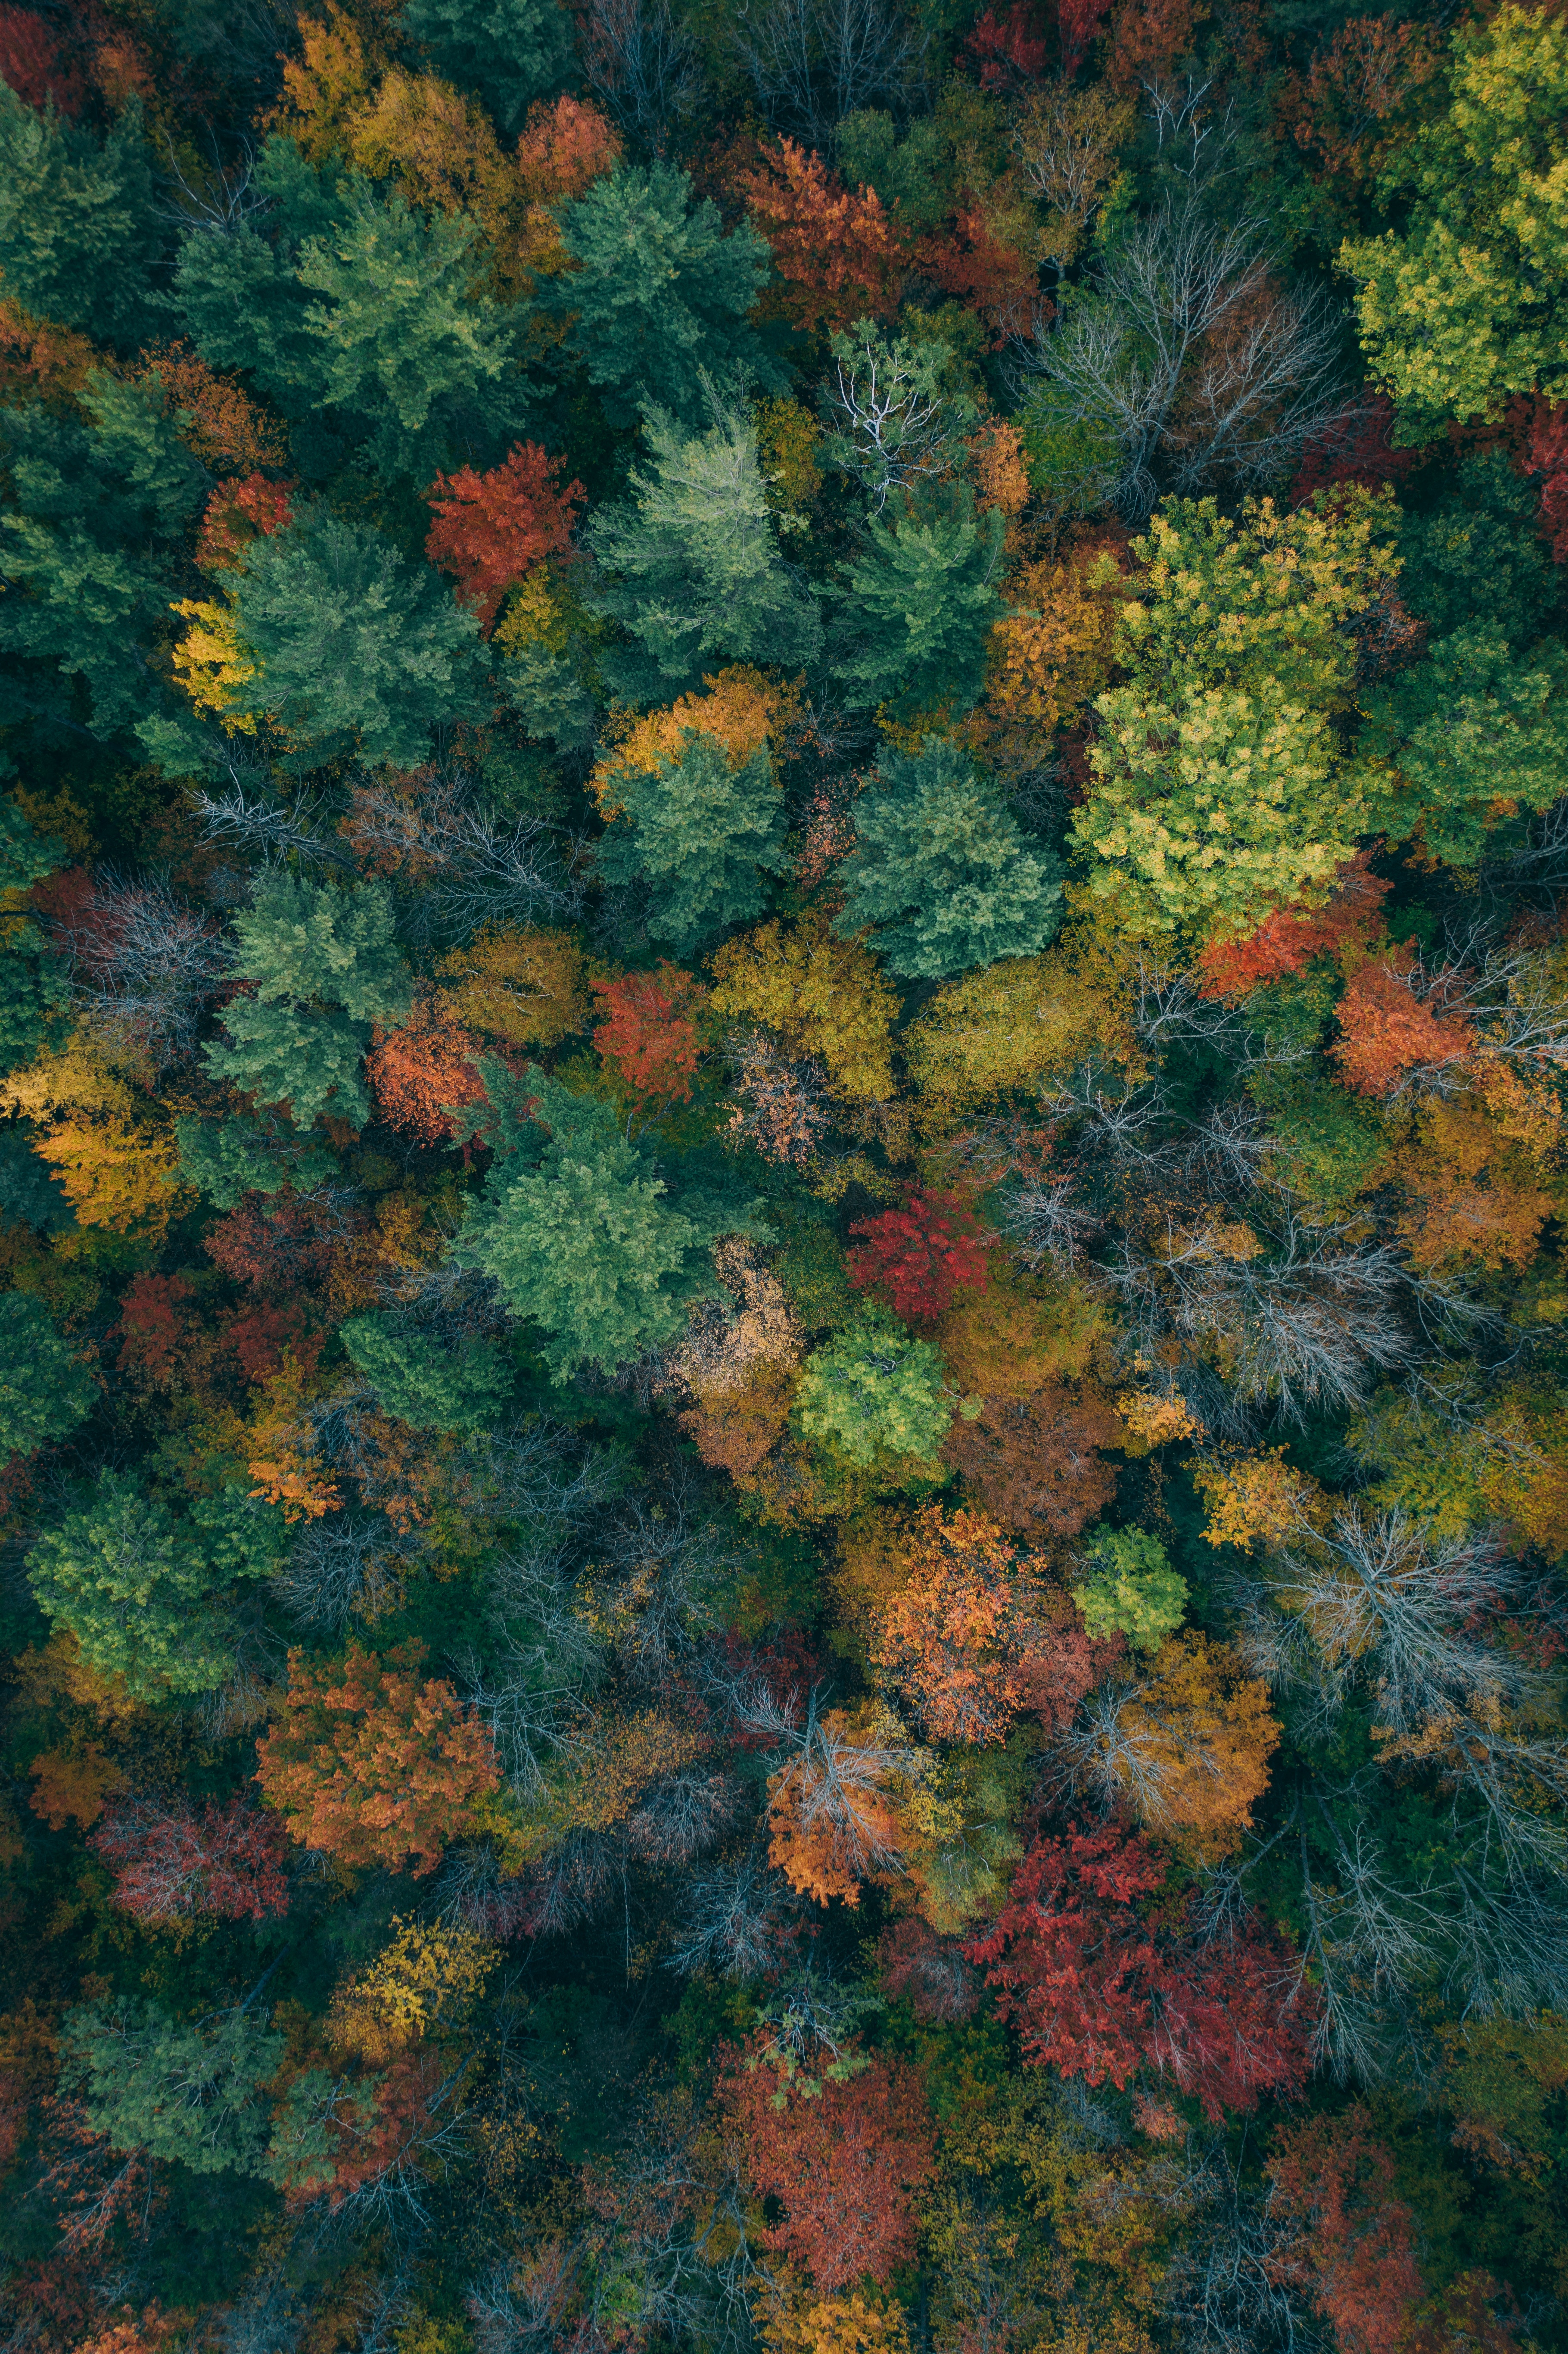 forest, colorful, colourful, nature, autumn colors, autumn paints, autumn, trees, view from above